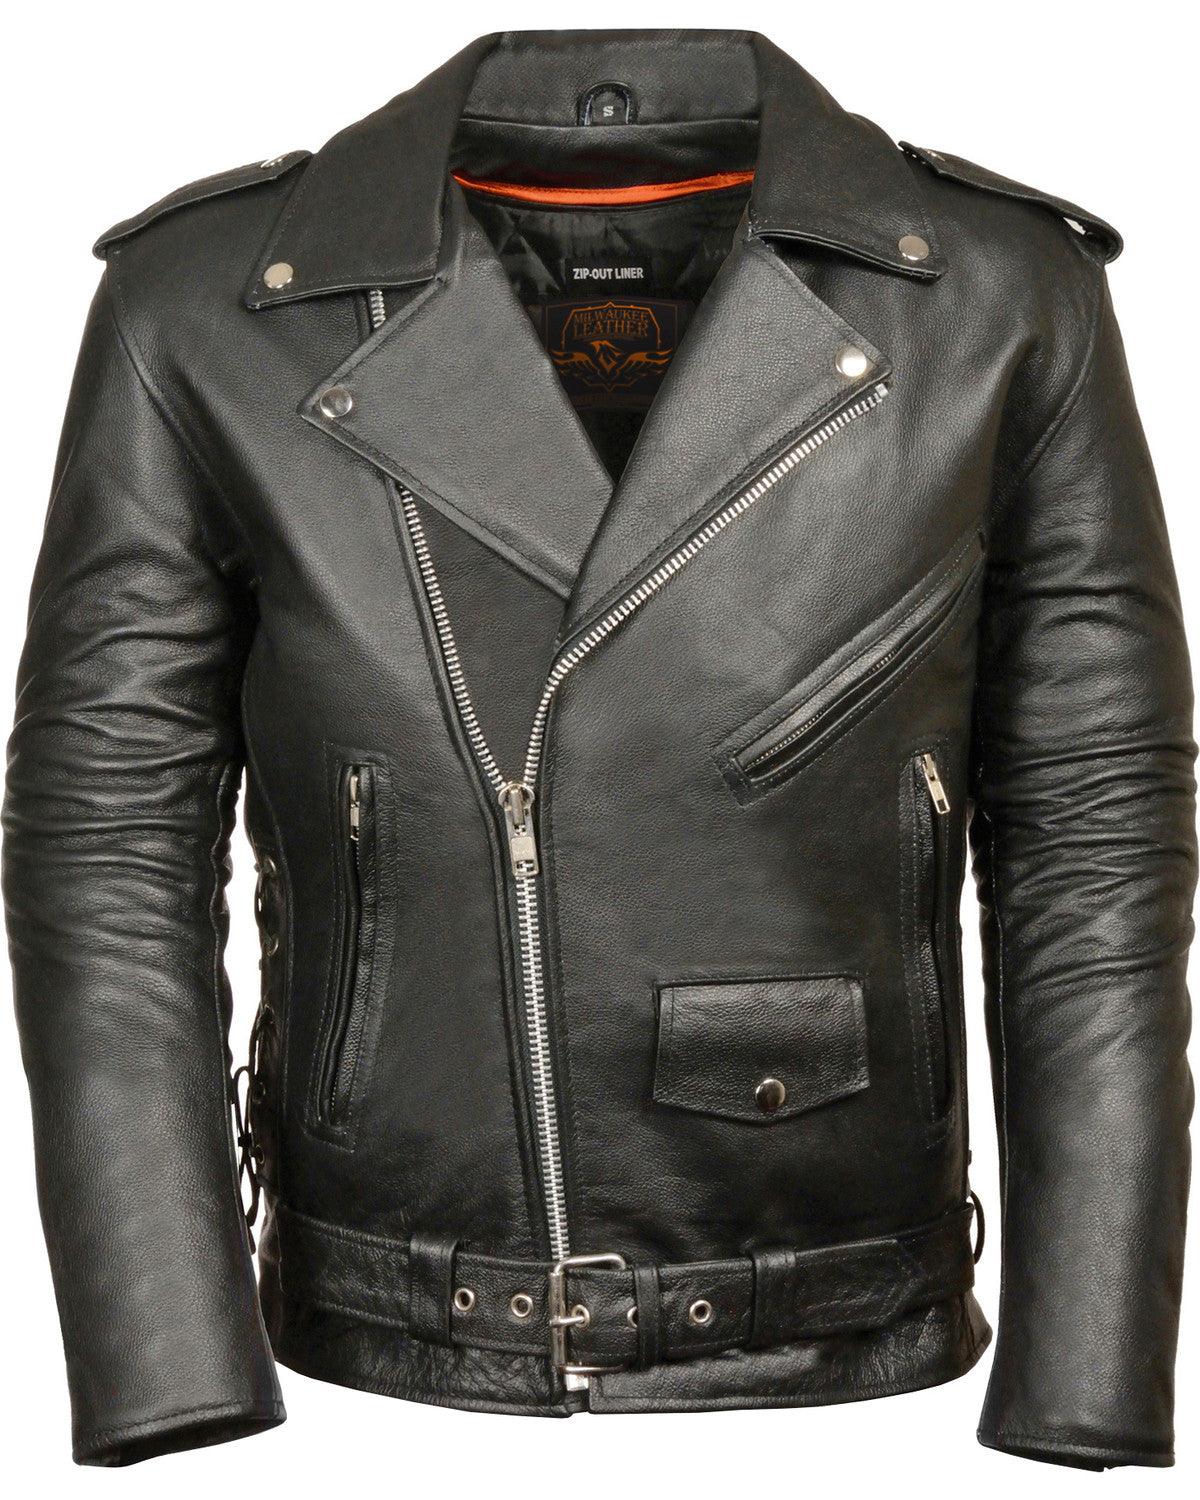 Classic Side Lace Police Style Motorcycle Jacket For Men